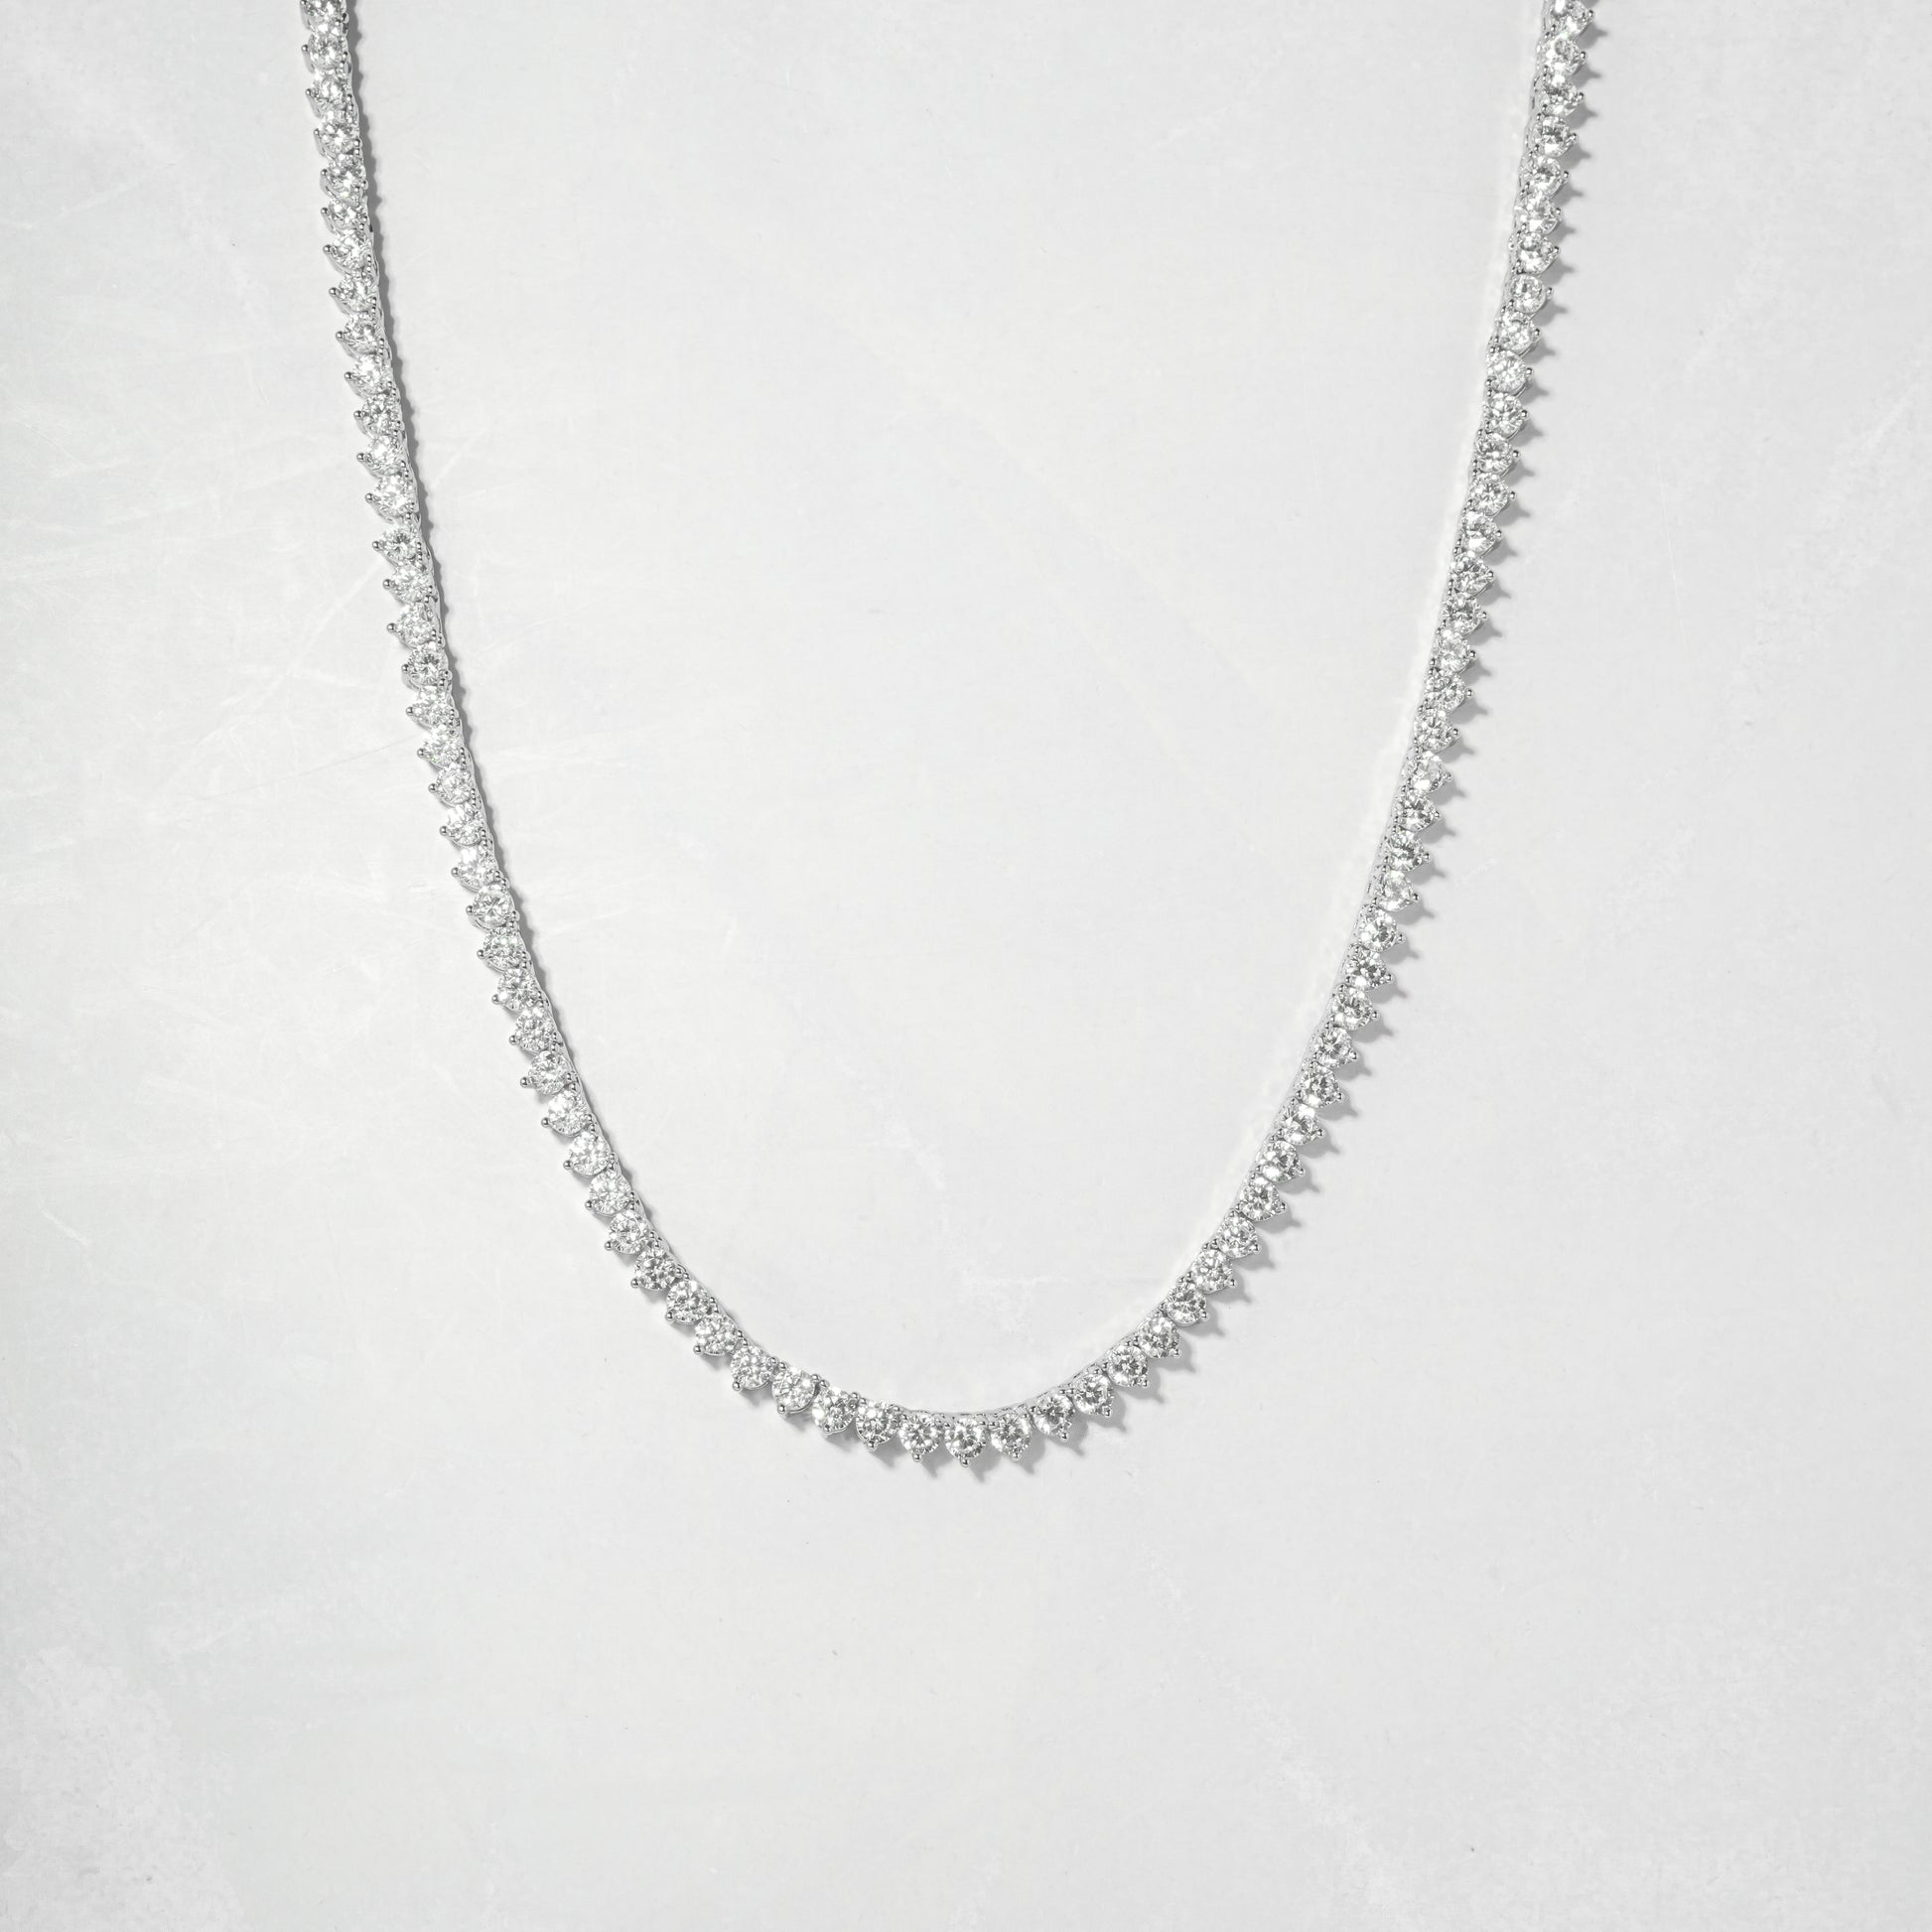 a necklace with a lot of diamonds on it